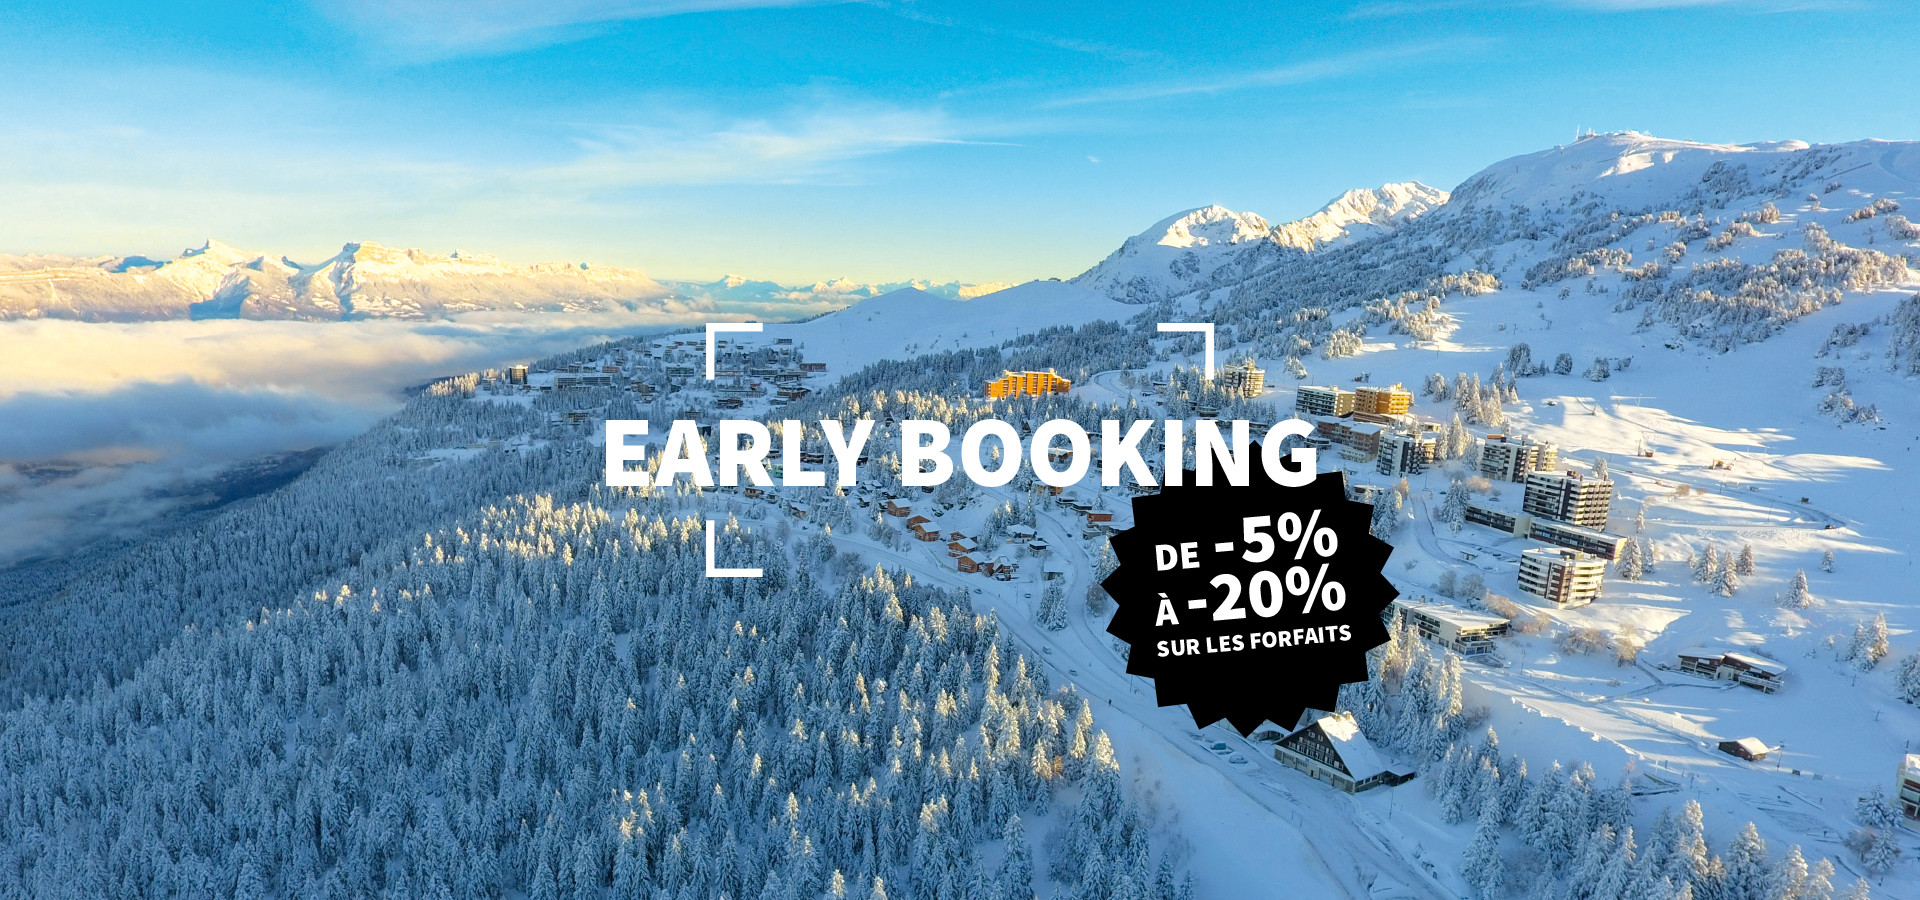 Chamrousse skipass early booking offer